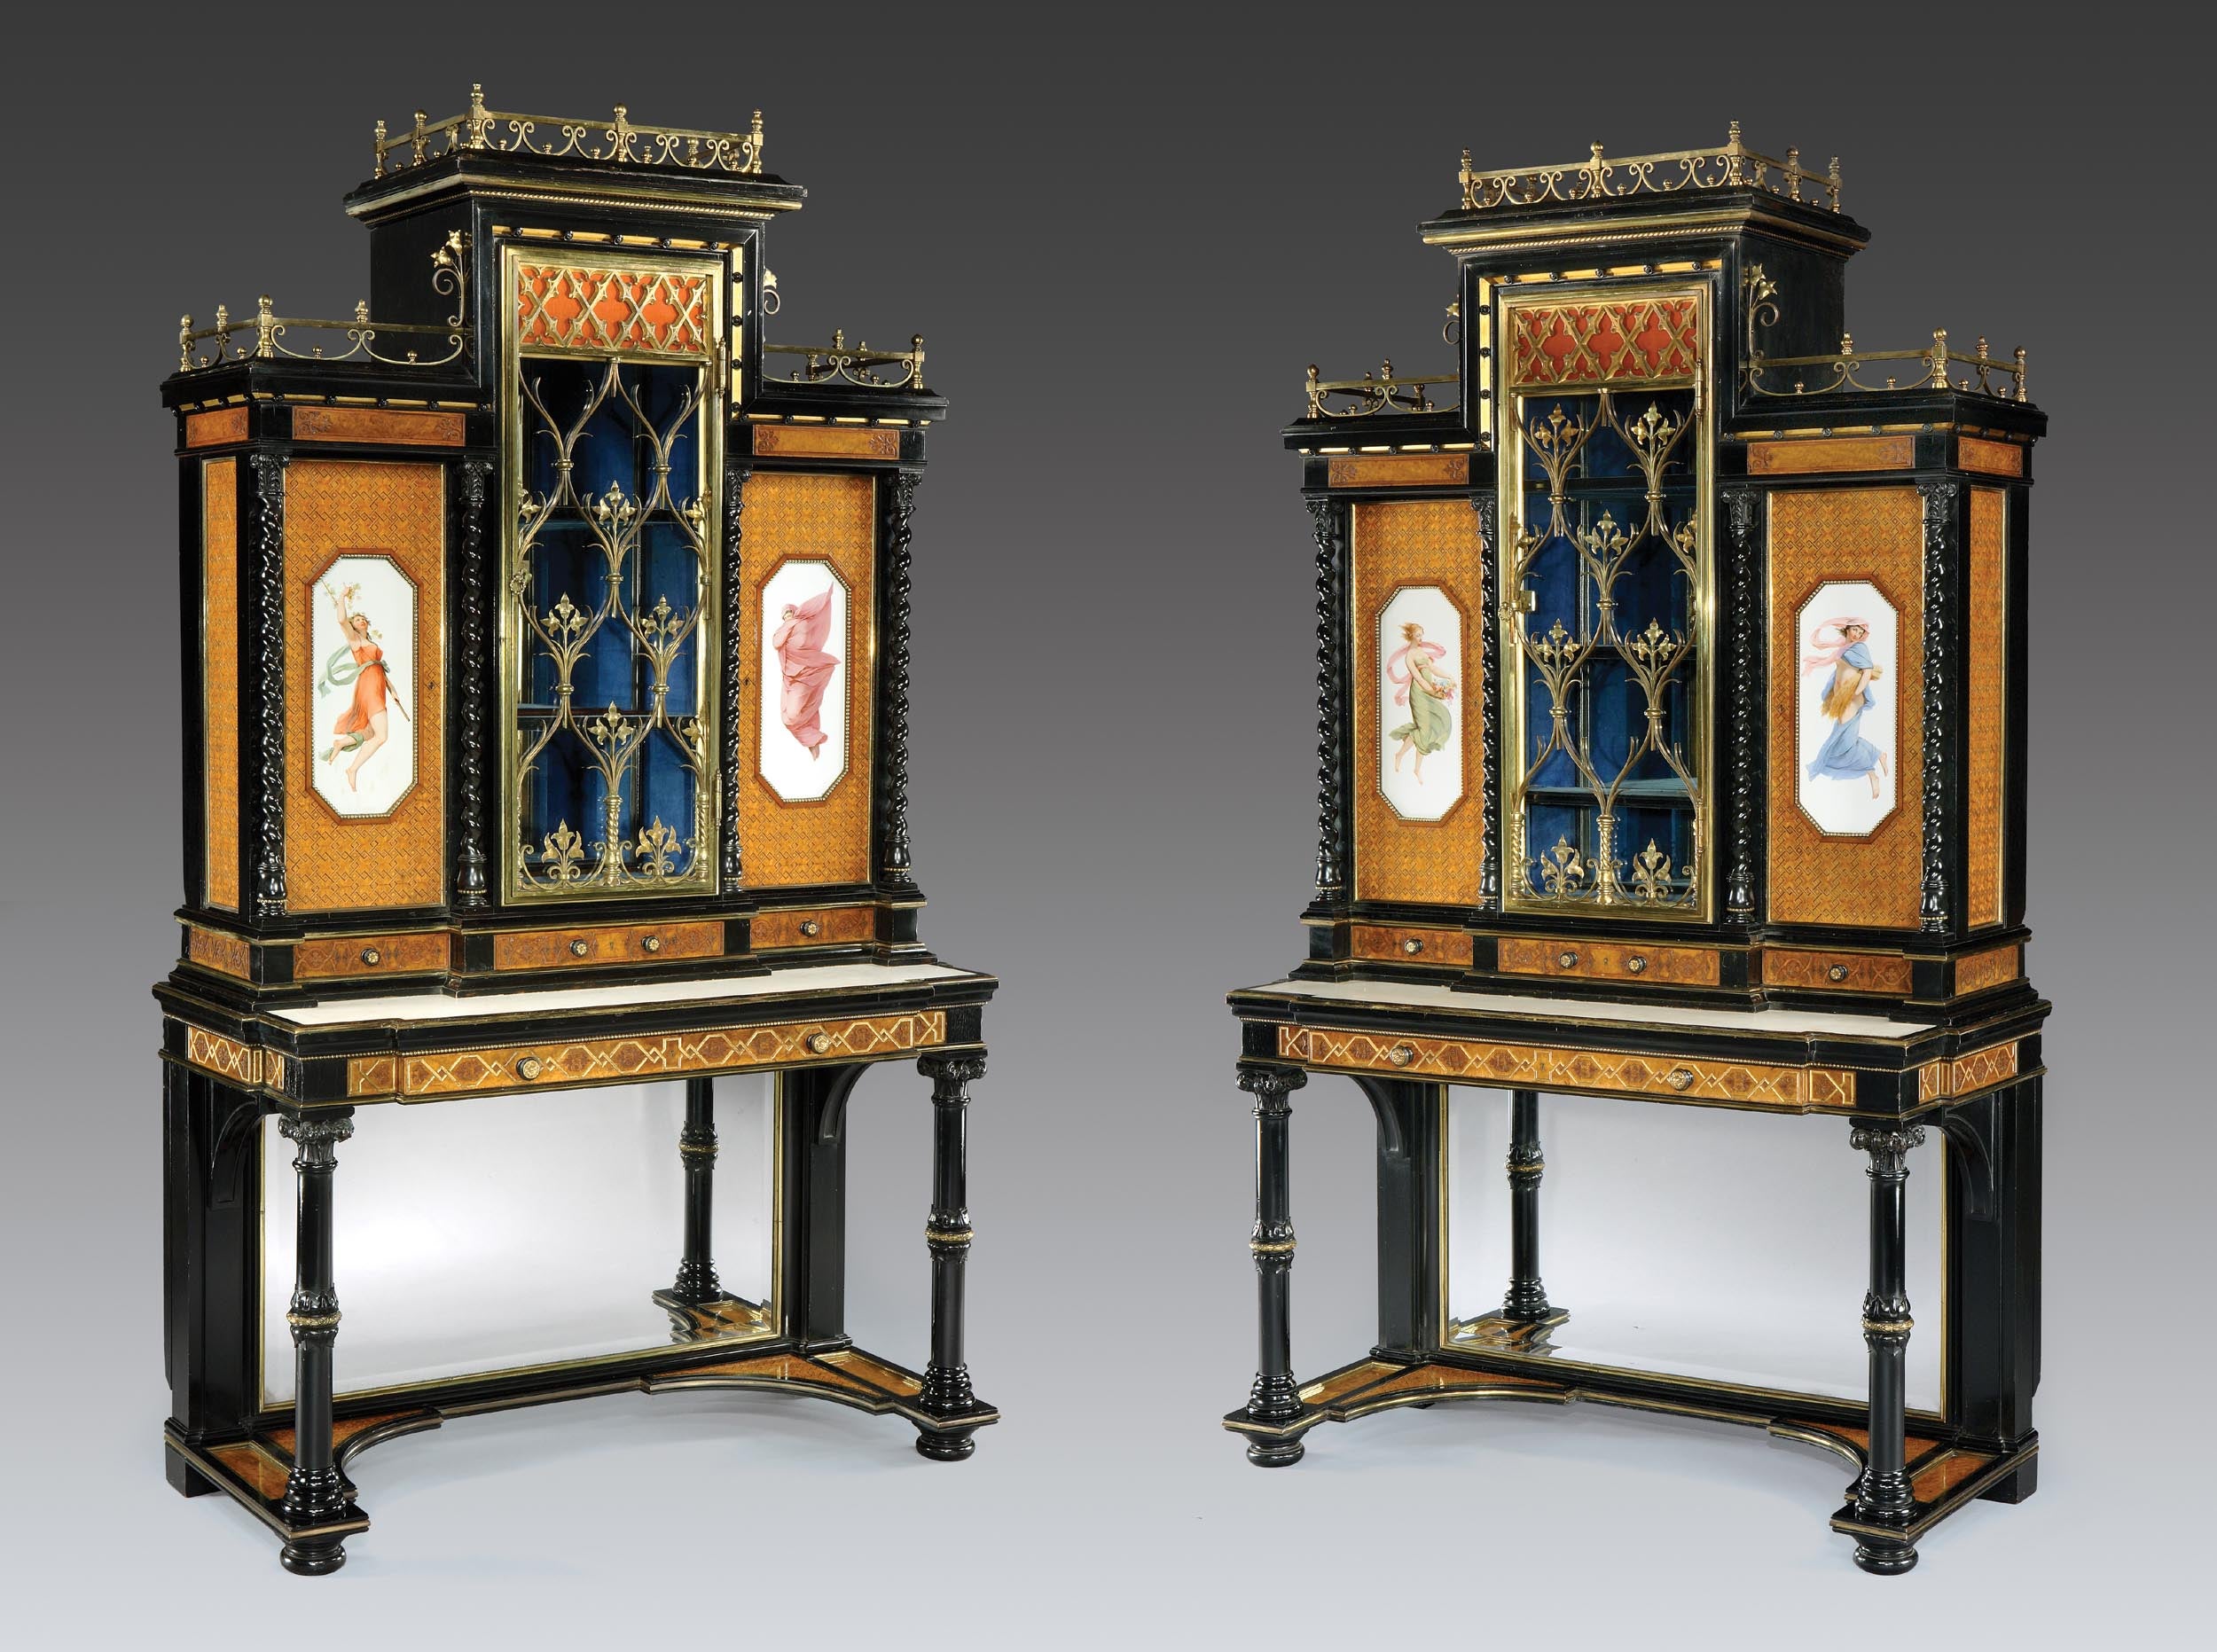 Pair of English Display Cabinets in the Renaissance Revival Style